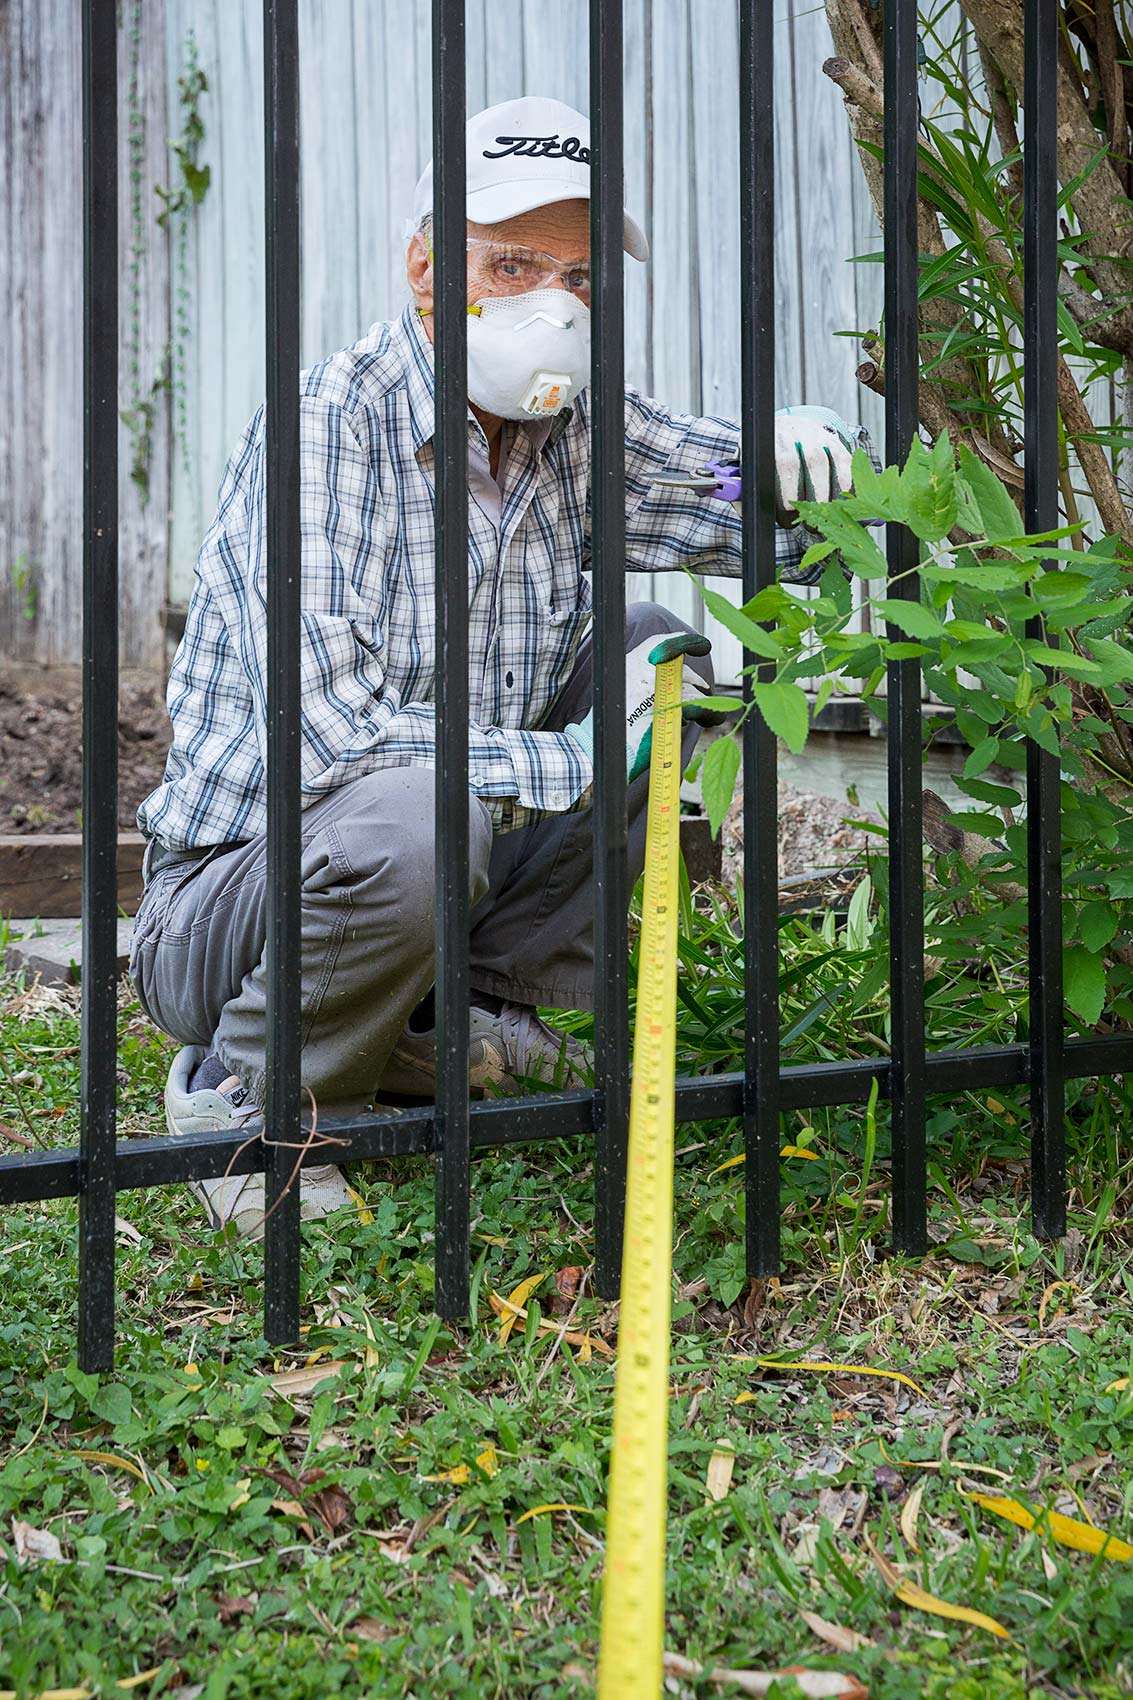 A masked man gardens while holding a long tape measure as a symbol of Covid-19 social distancing